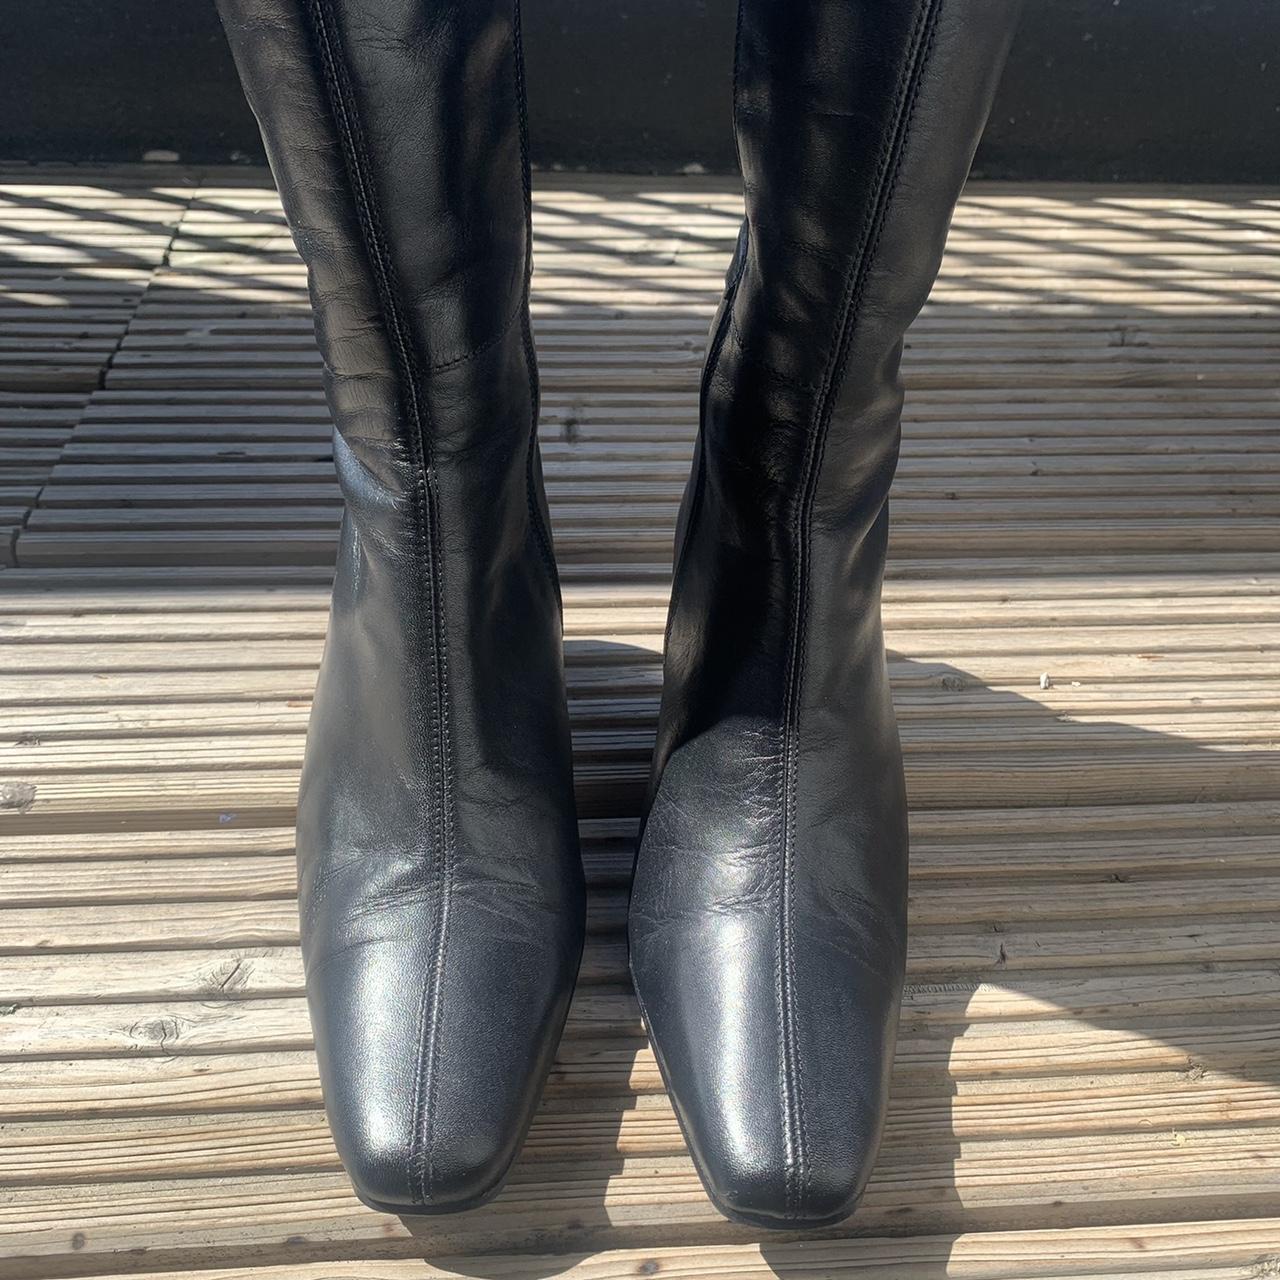 90s black knee high boots with square toe and block... - Depop